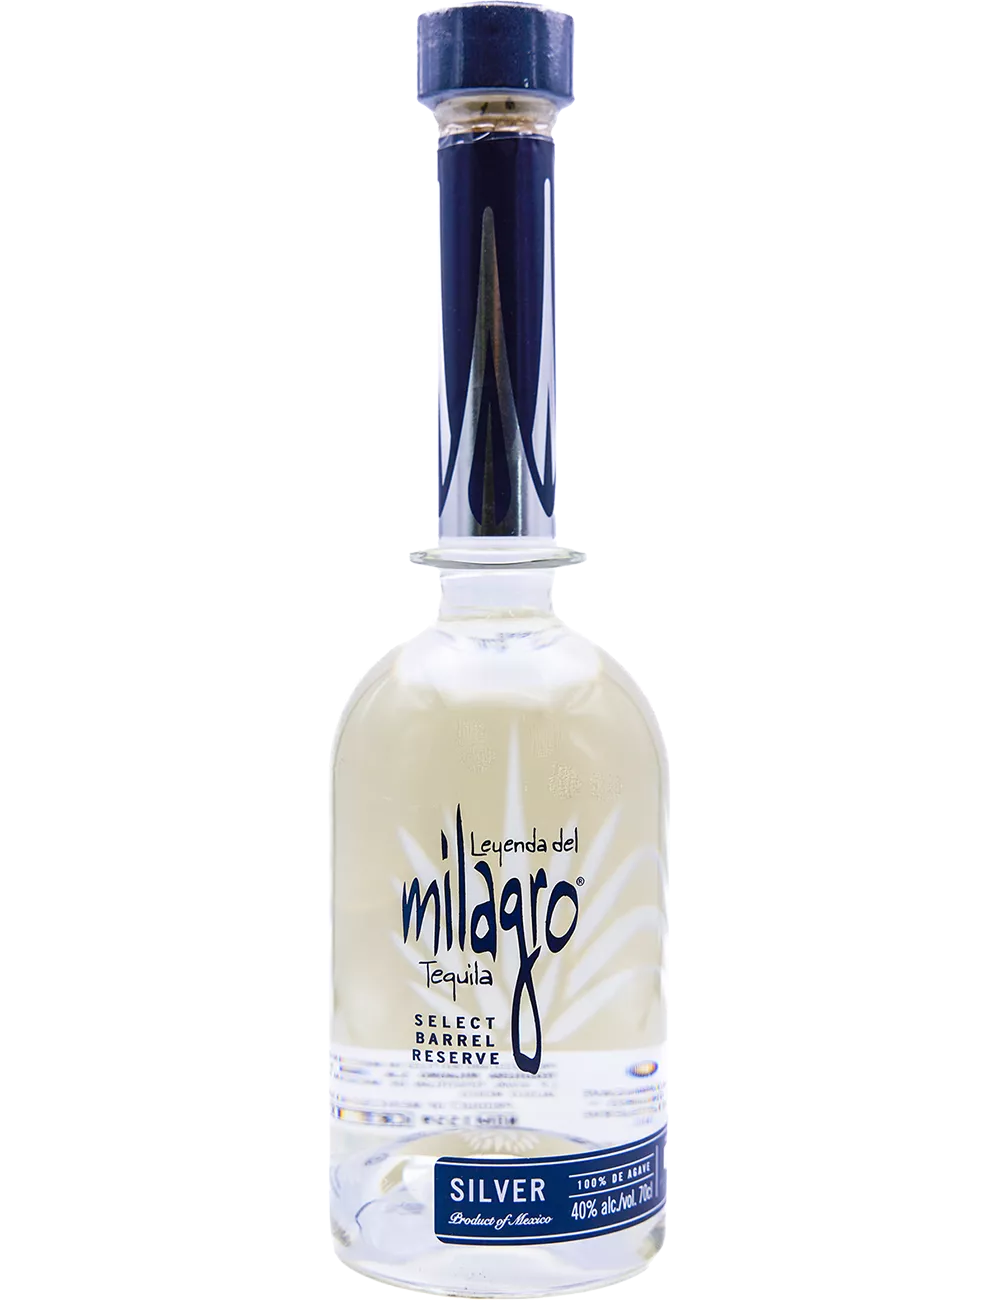 Milagro - Select Barrel - Tequila